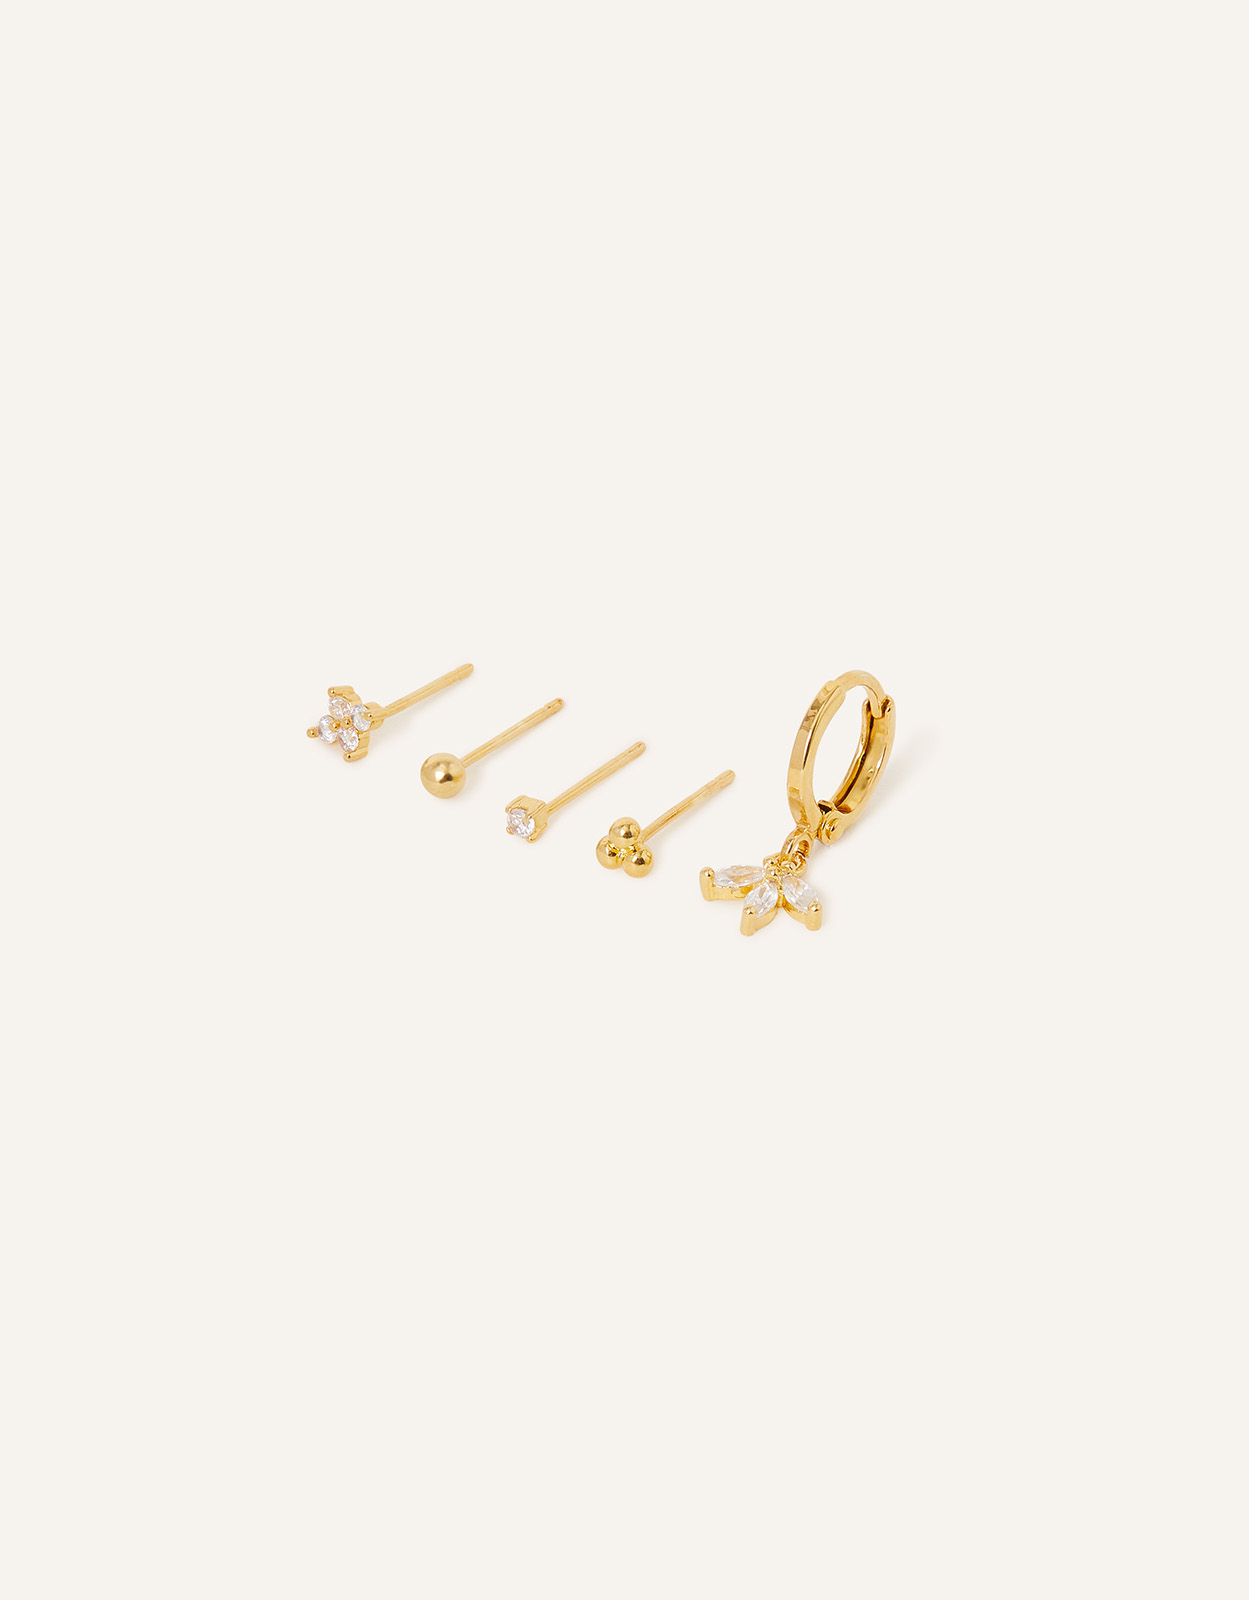 Accessorize Women's 14ct Gold-Plated Irregular Earrings 5 Pack